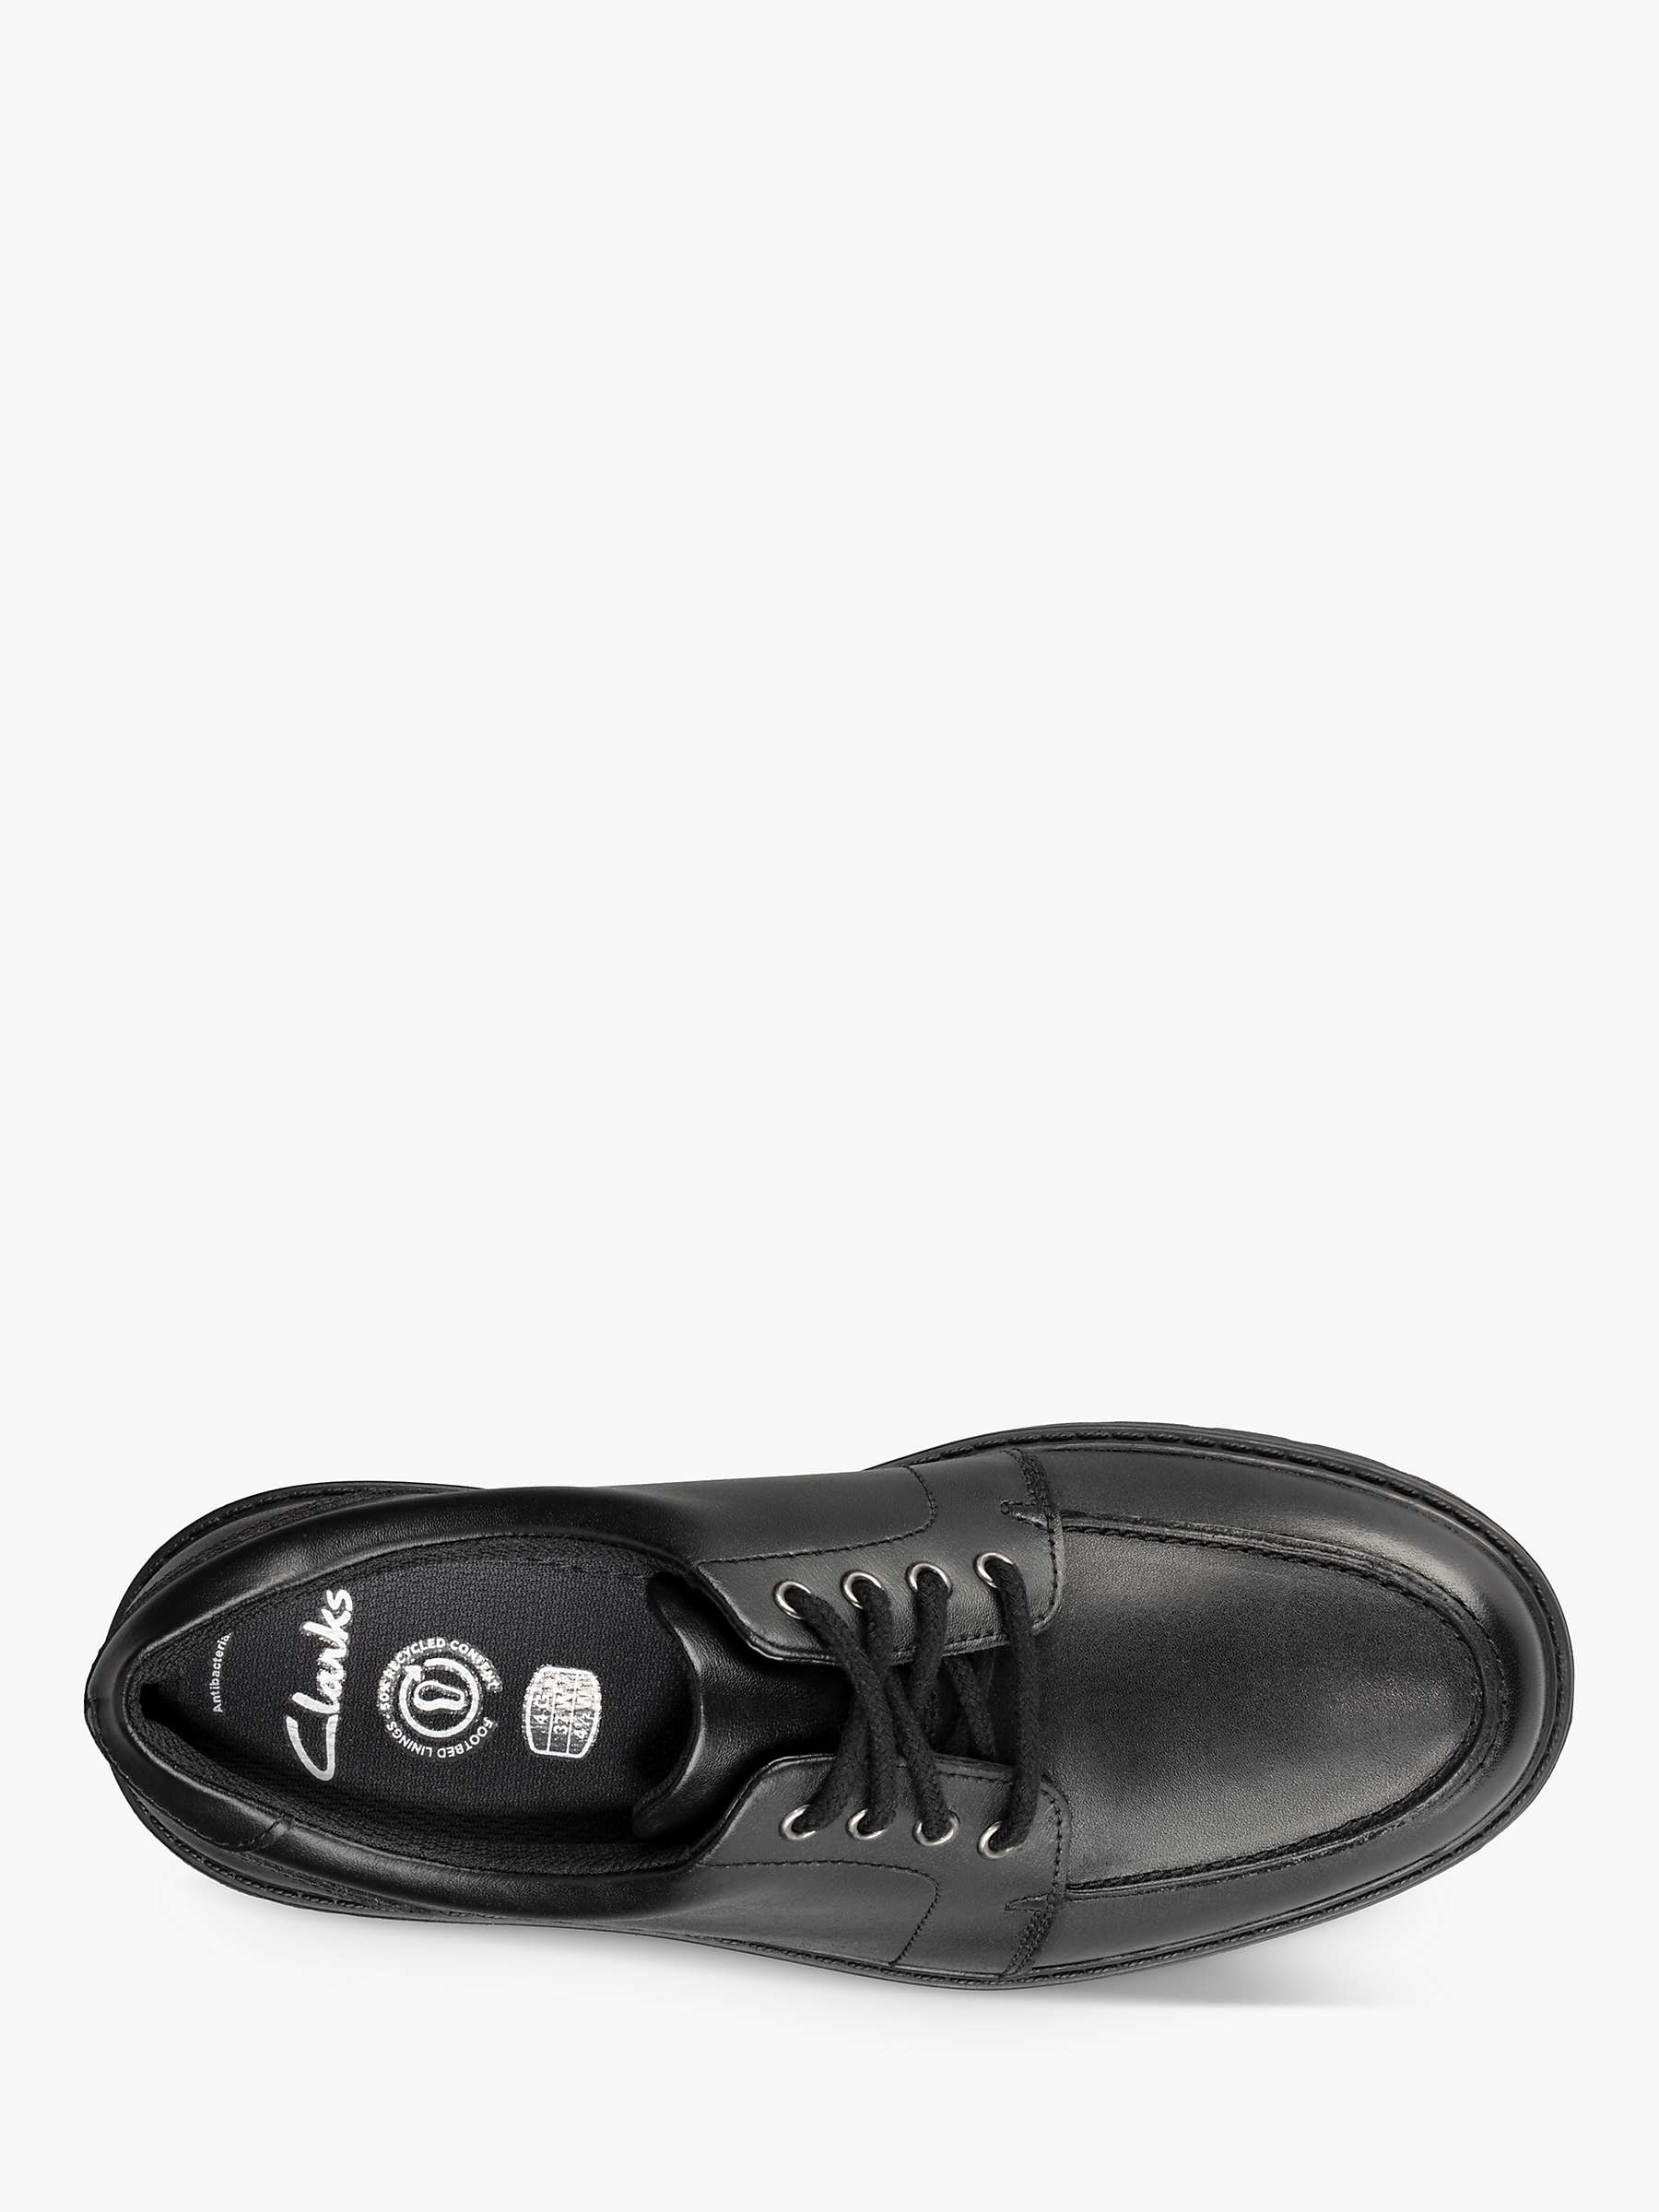 Buy Clarks Kids' Loxham Pace Leather School Shoes Online at johnlewis.com